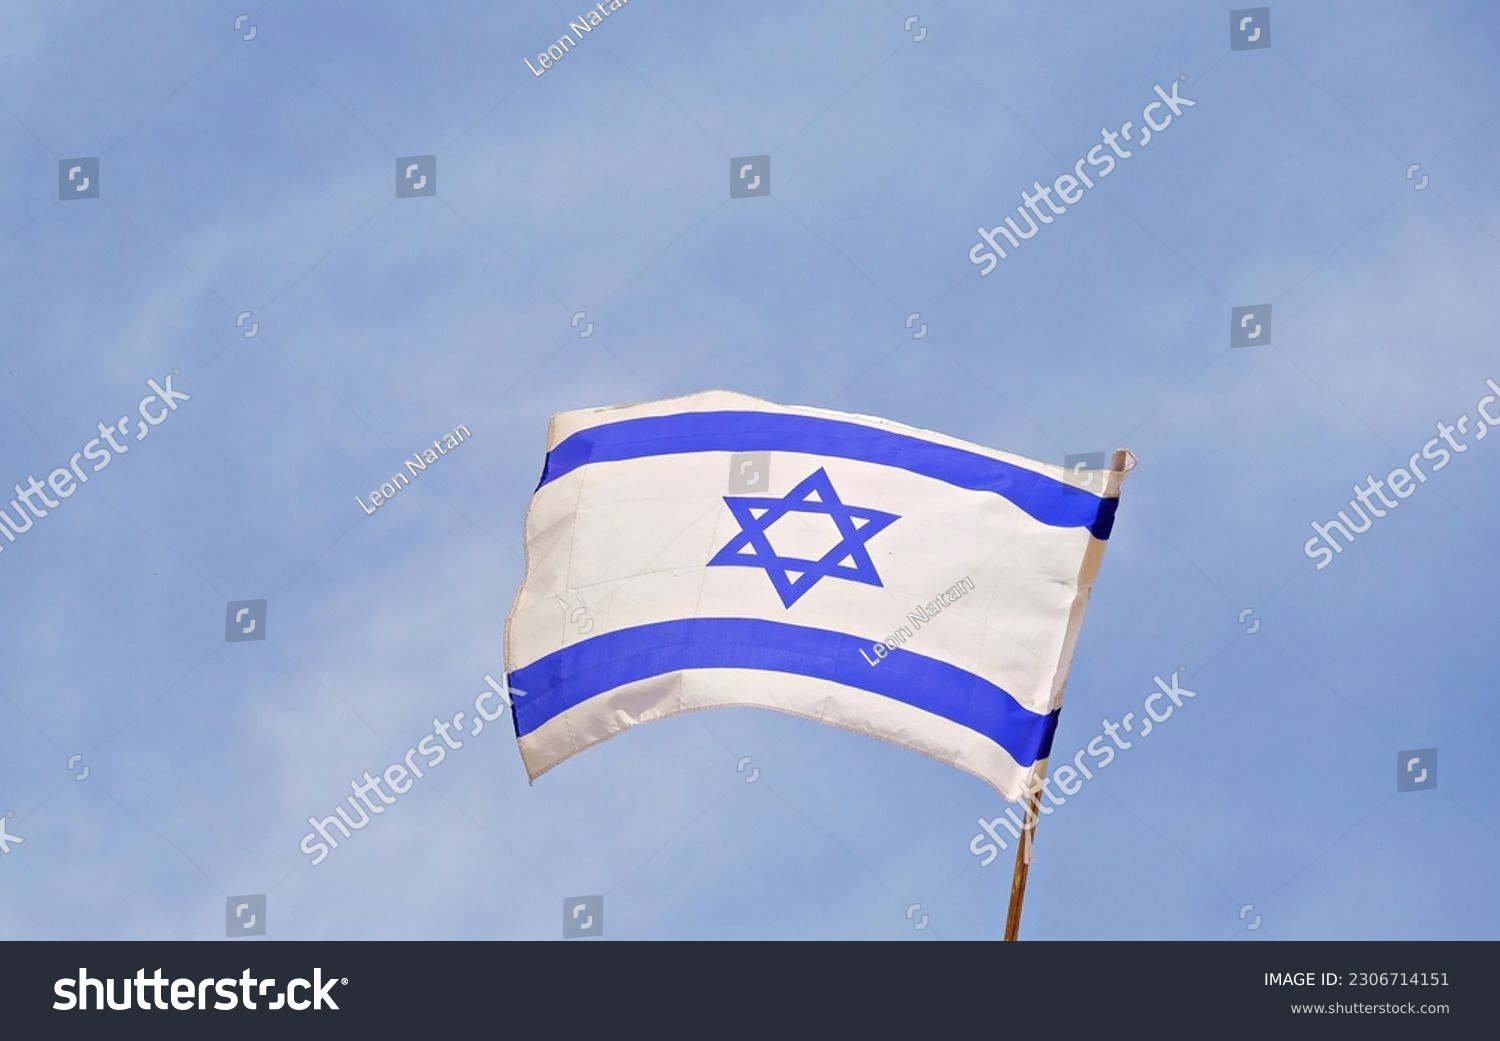 75 years since the founding of the State of Israel.
Flag of Israel. State symbol.
Flag of Israel on the background of the Wailing Wall. #2306714151